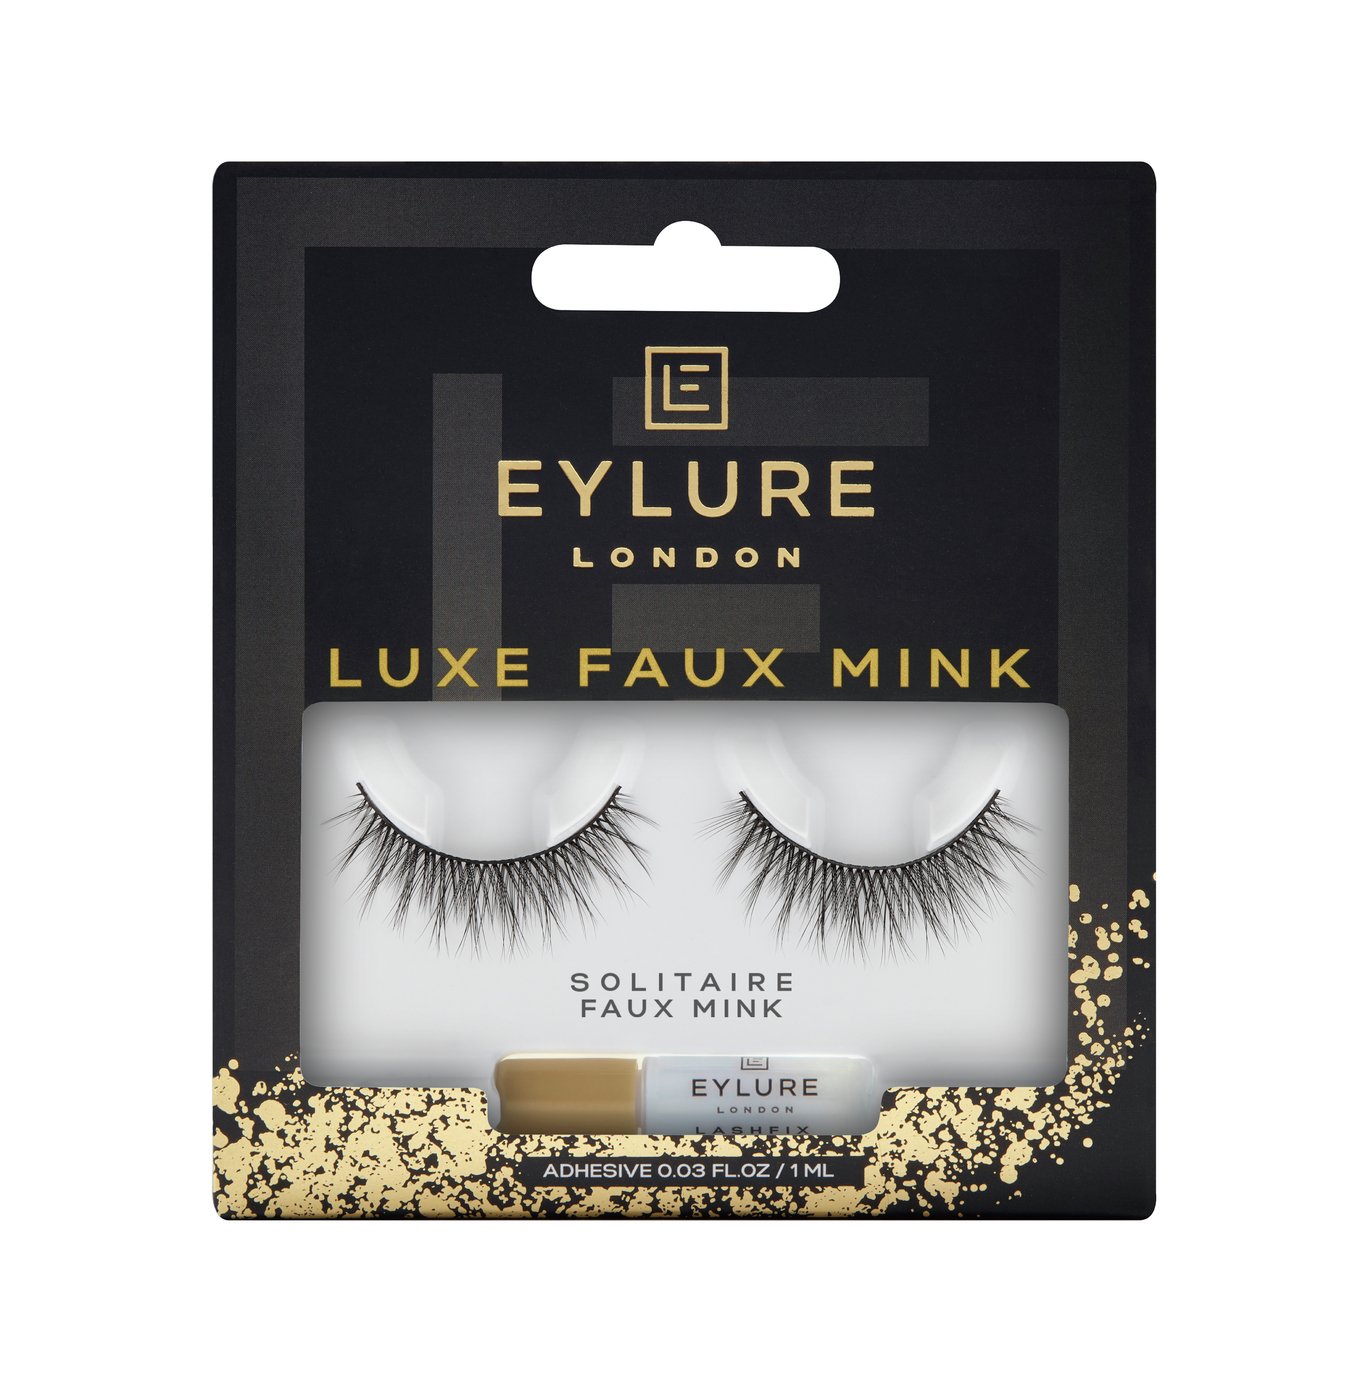 Eylure Luxe Faux Mink Solitaire Lashes